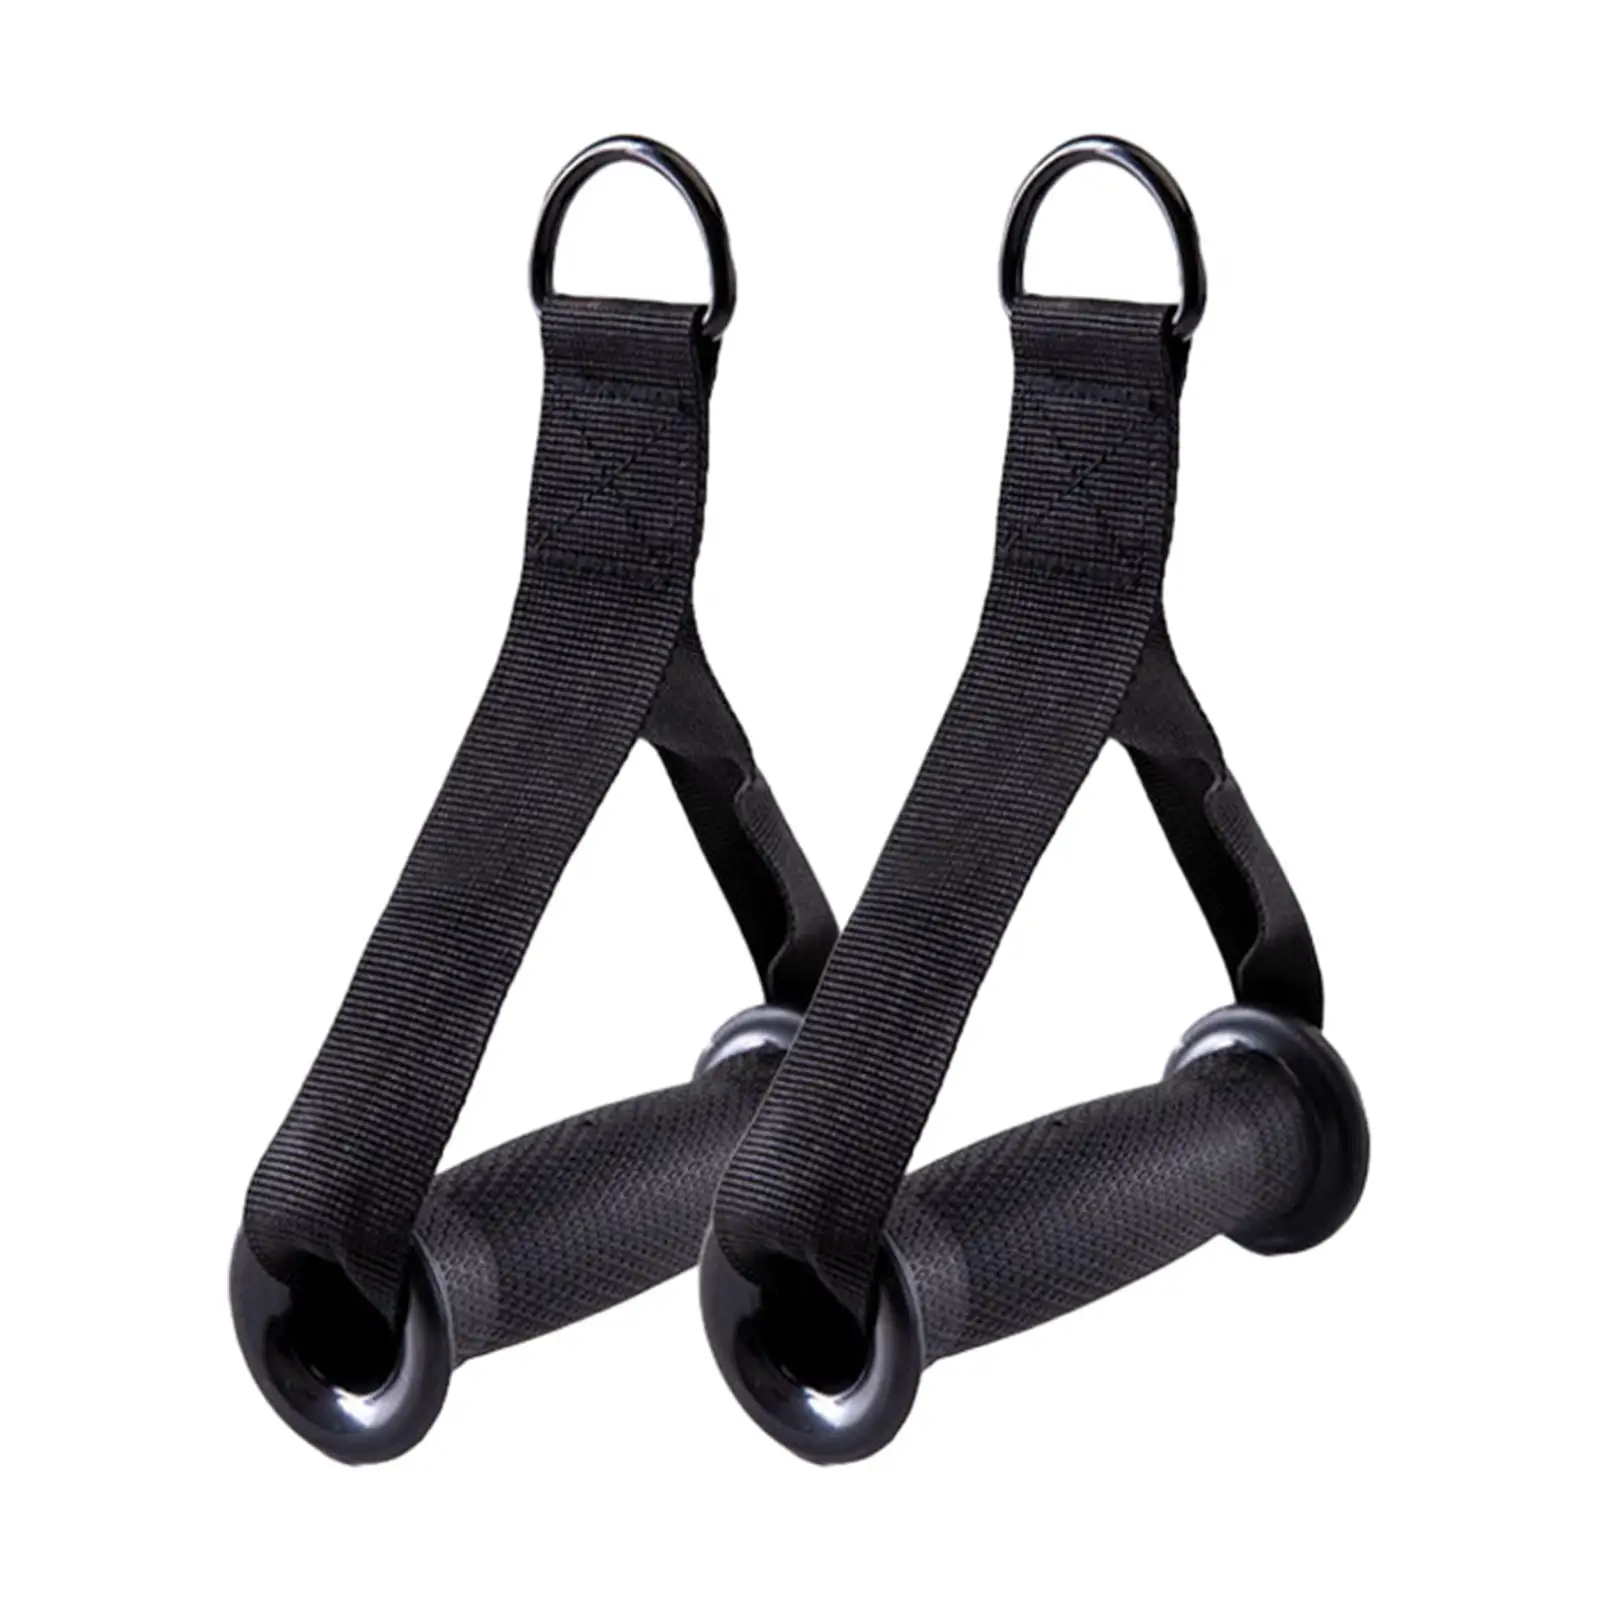 Grip Attachments Exercise Handles for Weight Lifting Fitness Equipment Yoga